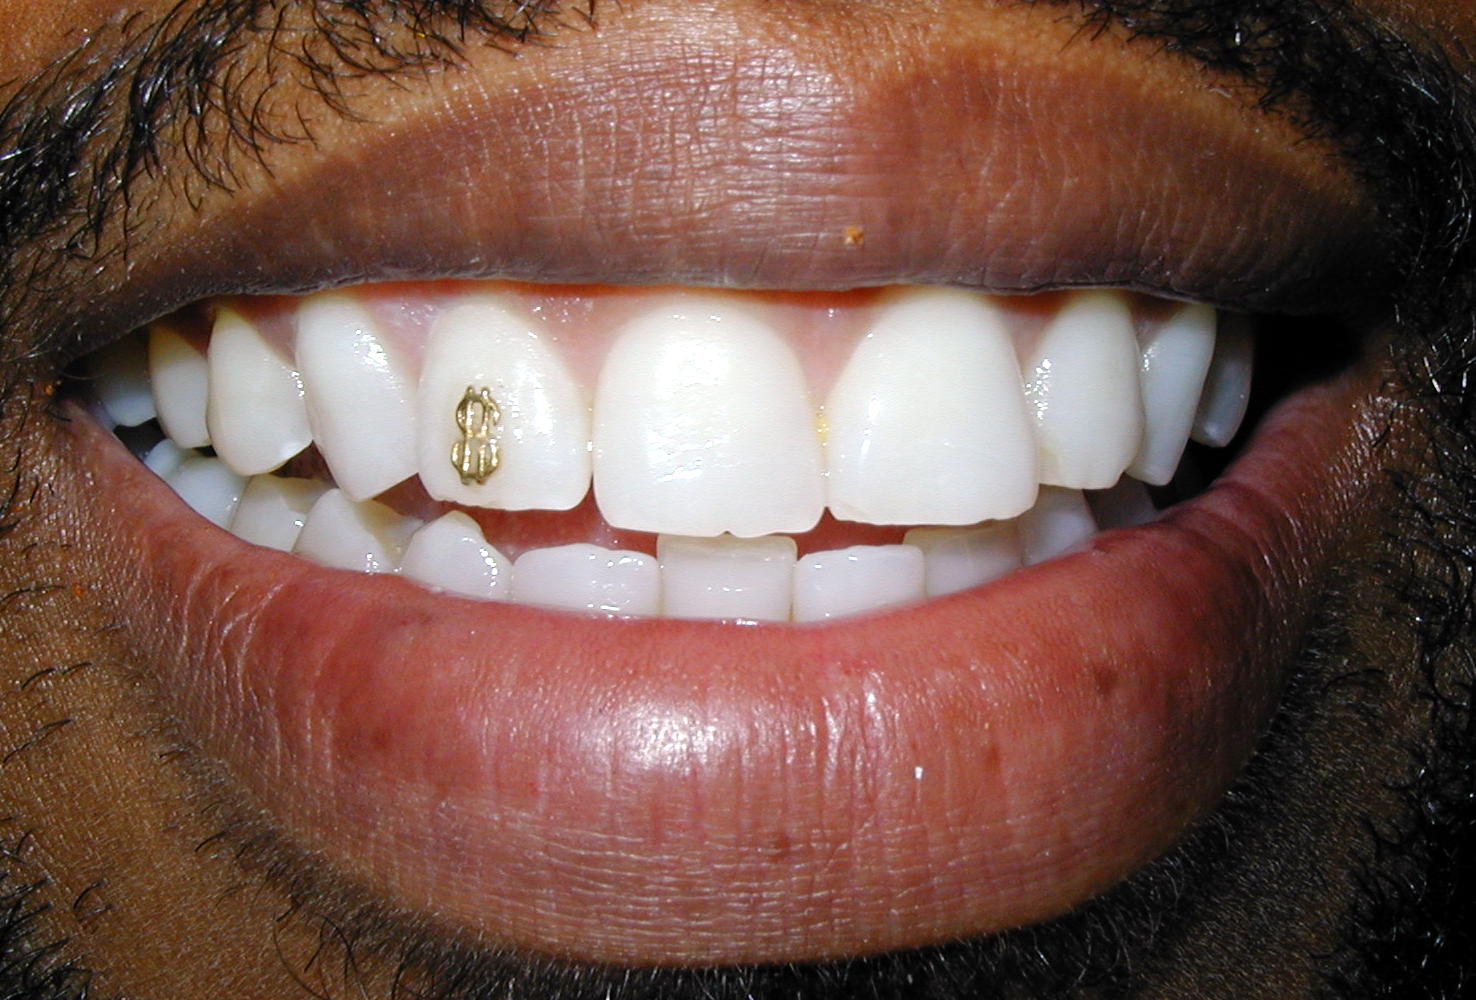 Teeth Jewels are Better than Teeth Grills